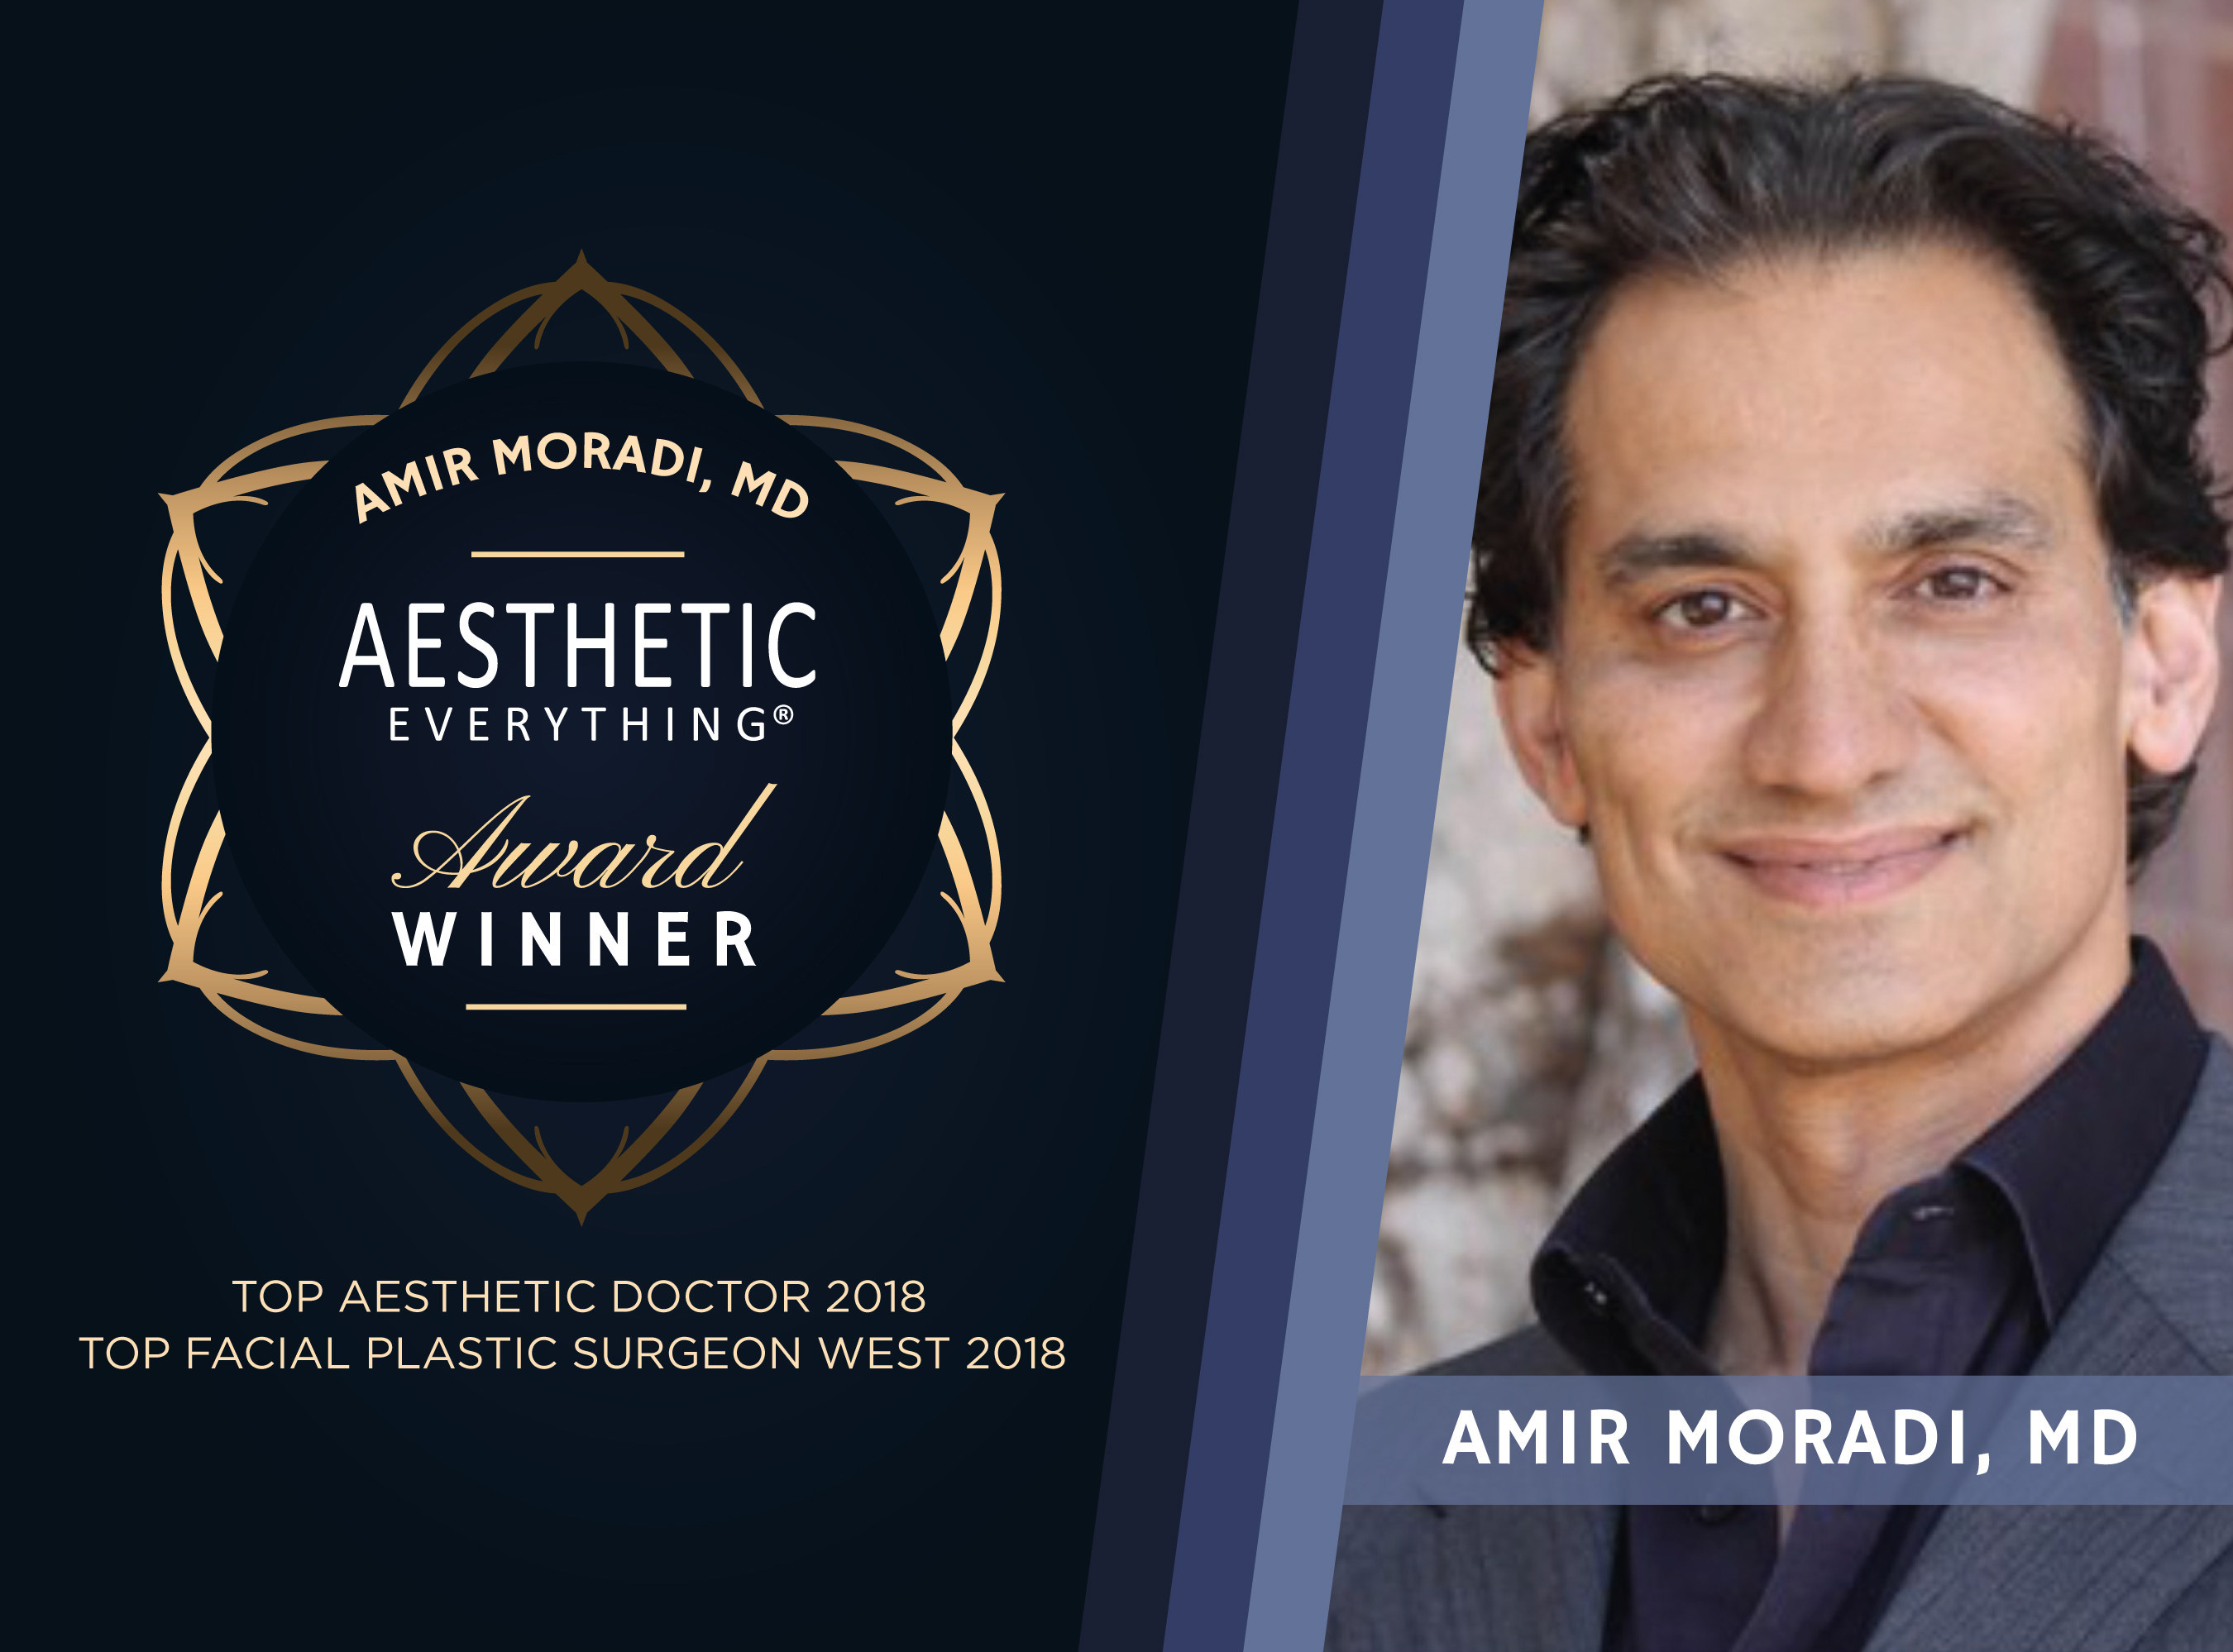 Dr. Amir Moradi Receives Double Wins in Aesthetic Everything® 2018 Awards, Nabs “Top Aesthetic Doctor” and “Top Facial Plastic Surgeon West”